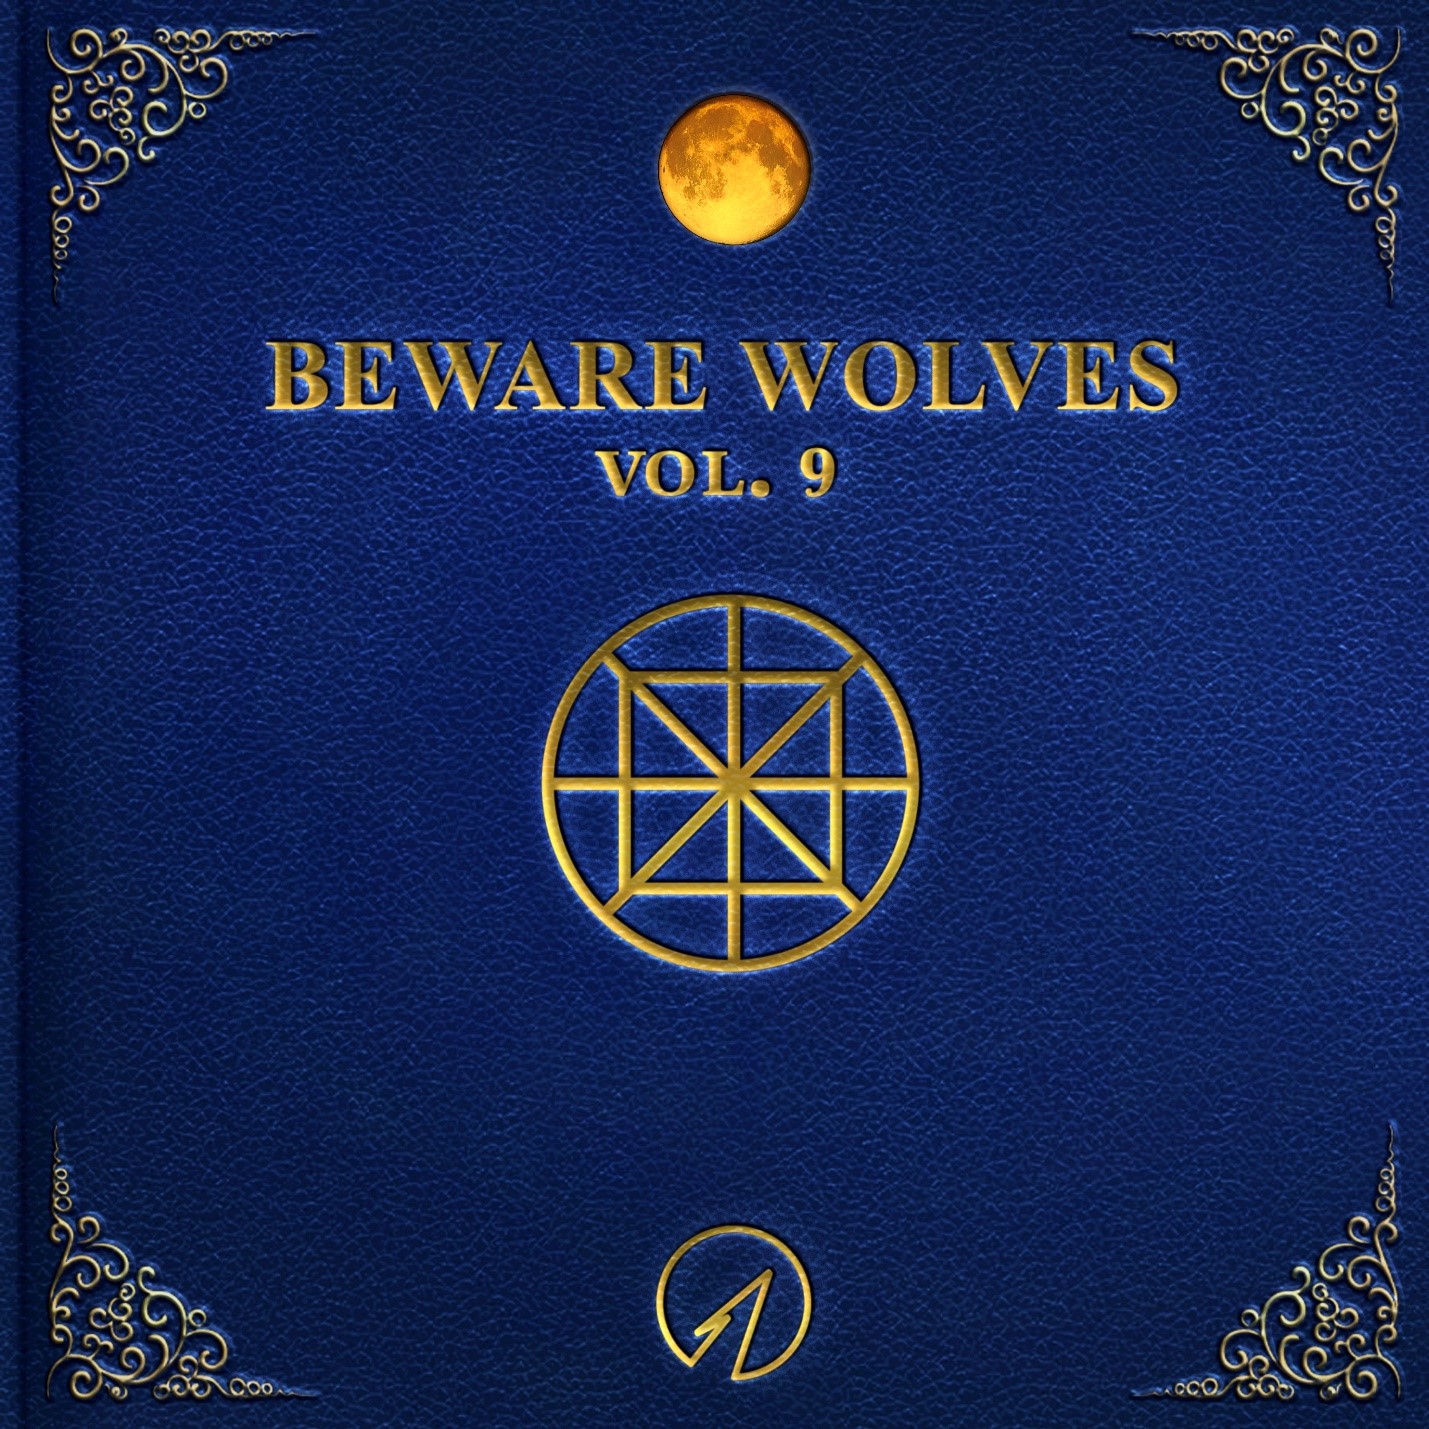 Beware Wolves Volume 9 by Beware Wolves: Album Review